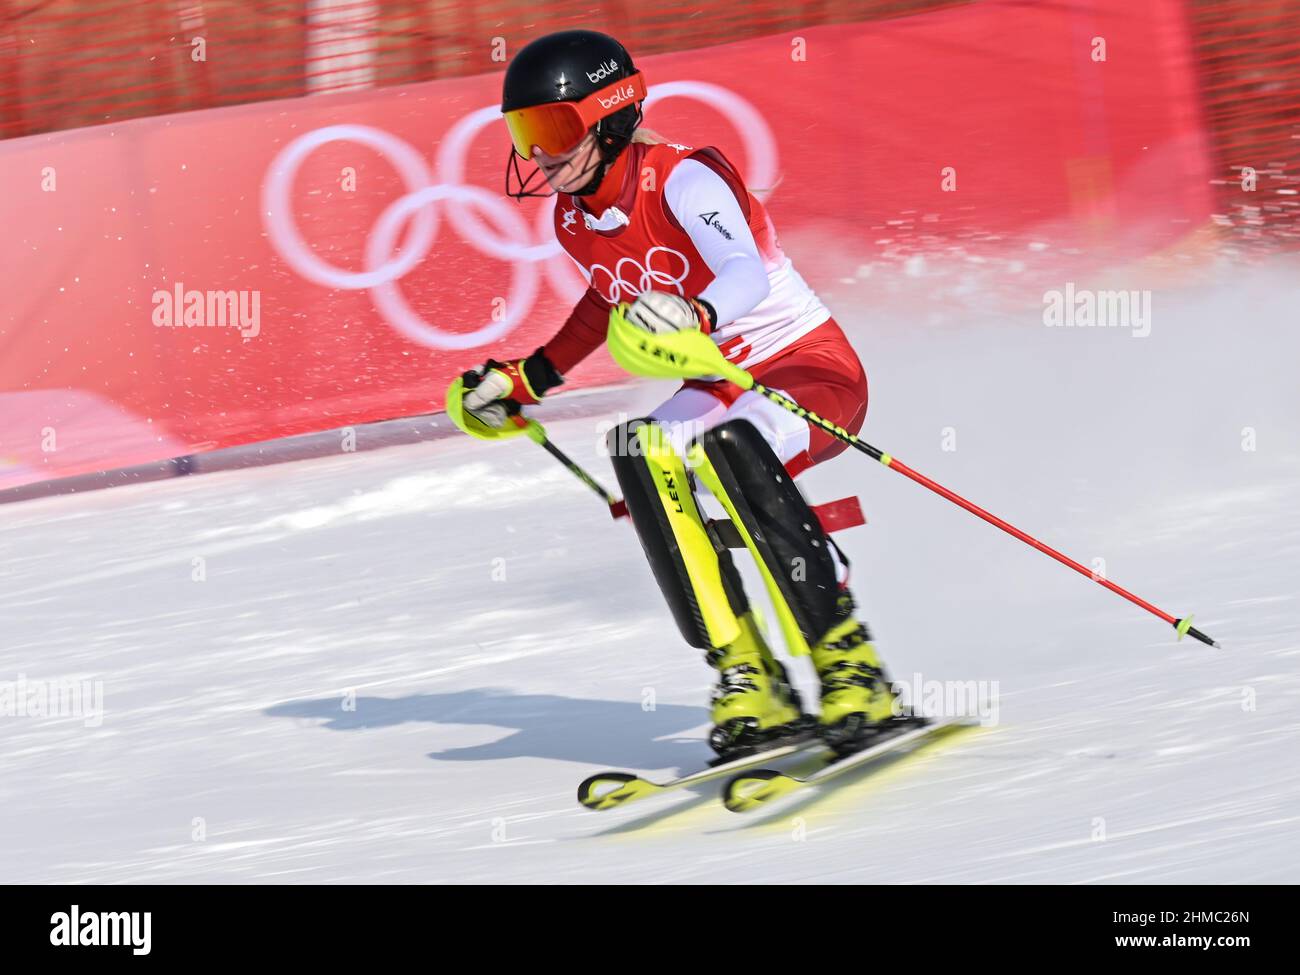 Beijing, China. 9th Feb, 2022. Katharina Truppe of Austria competes during the alpine skiing women's slalom of the Beijing 2022 Winter Olympics at Yanqing National Alpine Skiing Centre in Beijing, capital of China, Feb. 9, 2022. Credit: Chen Yichen/Xinhua/Alamy Live News Stock Photo